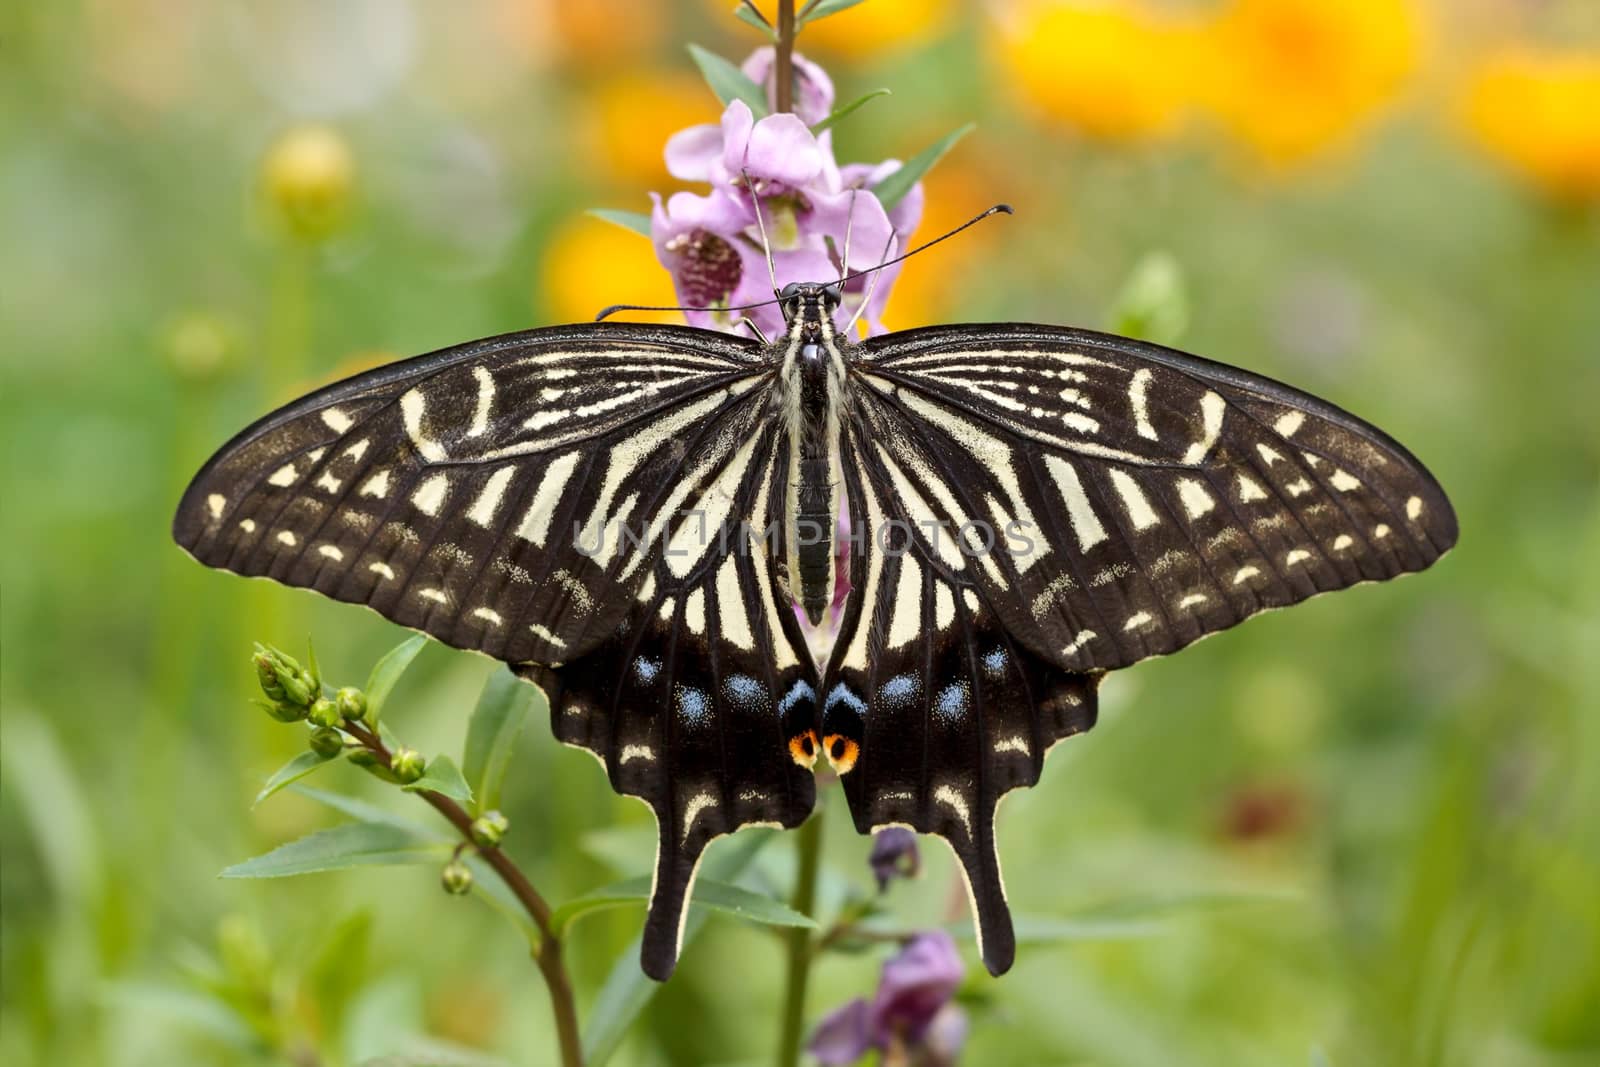 Swallowtail butterfly on a flower by dsmsoft